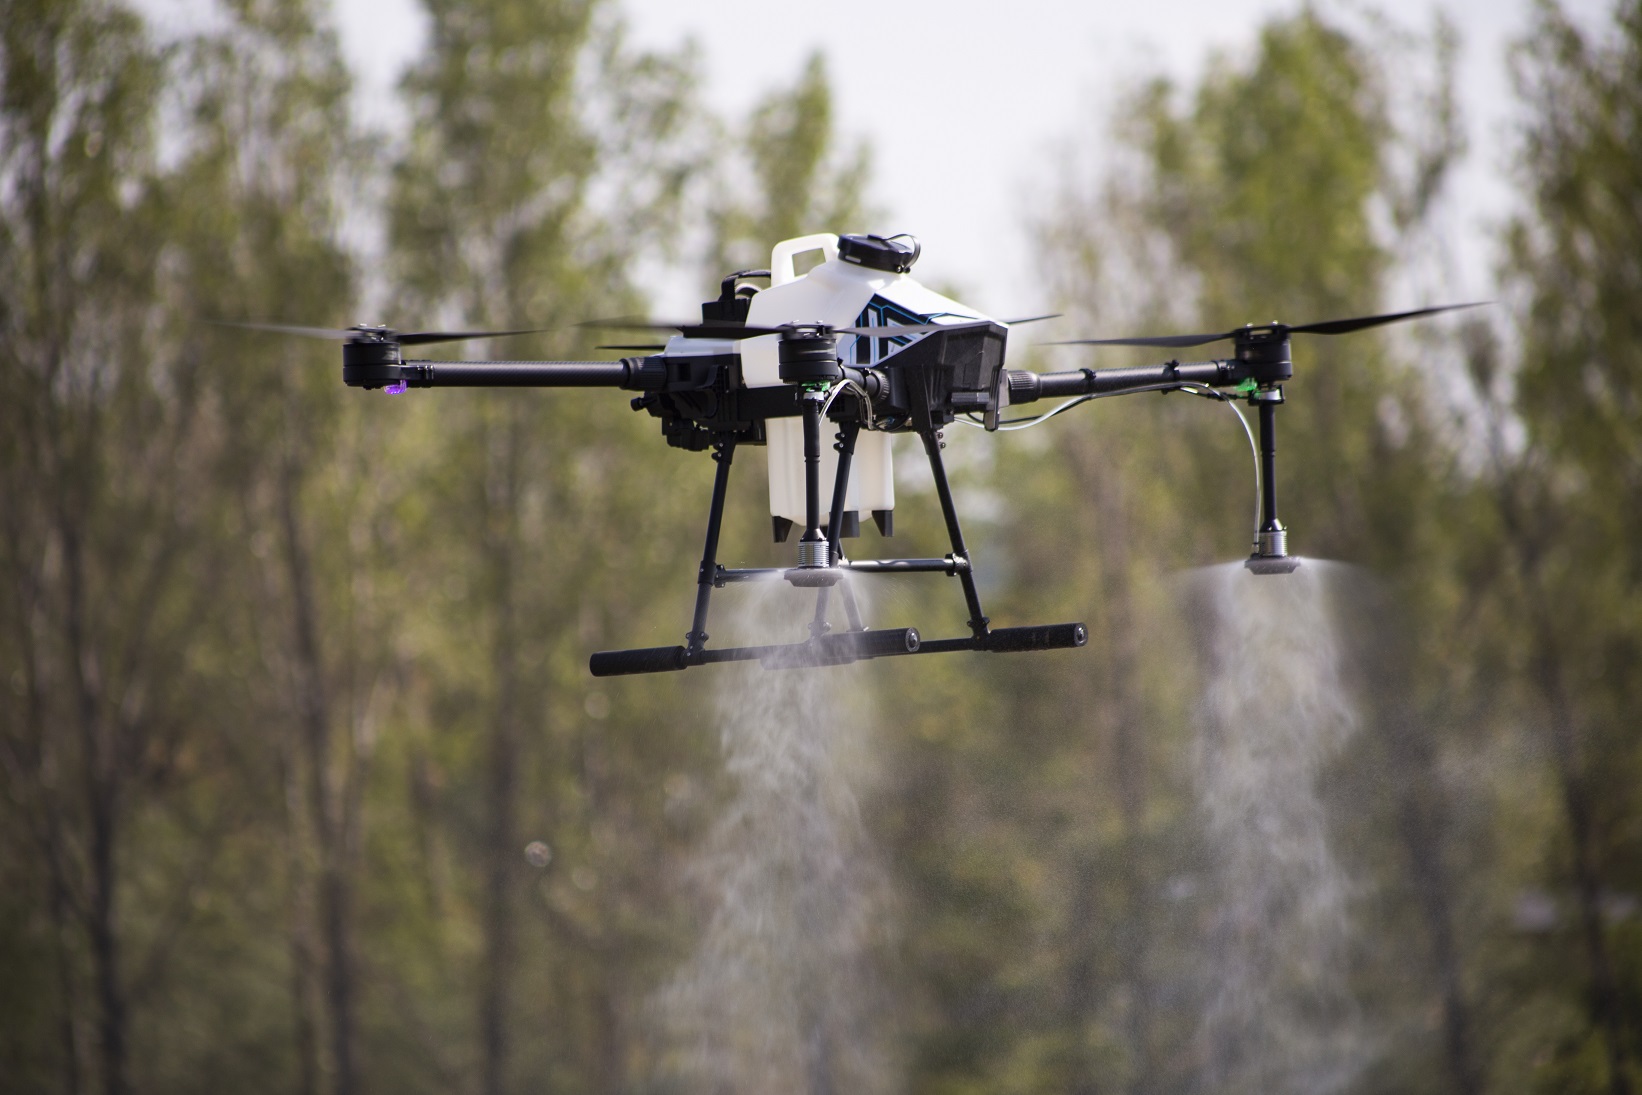 AGRICULTURAL DRONES FOR SPRAYING - ADVANTAGES AND APPLICATIONS